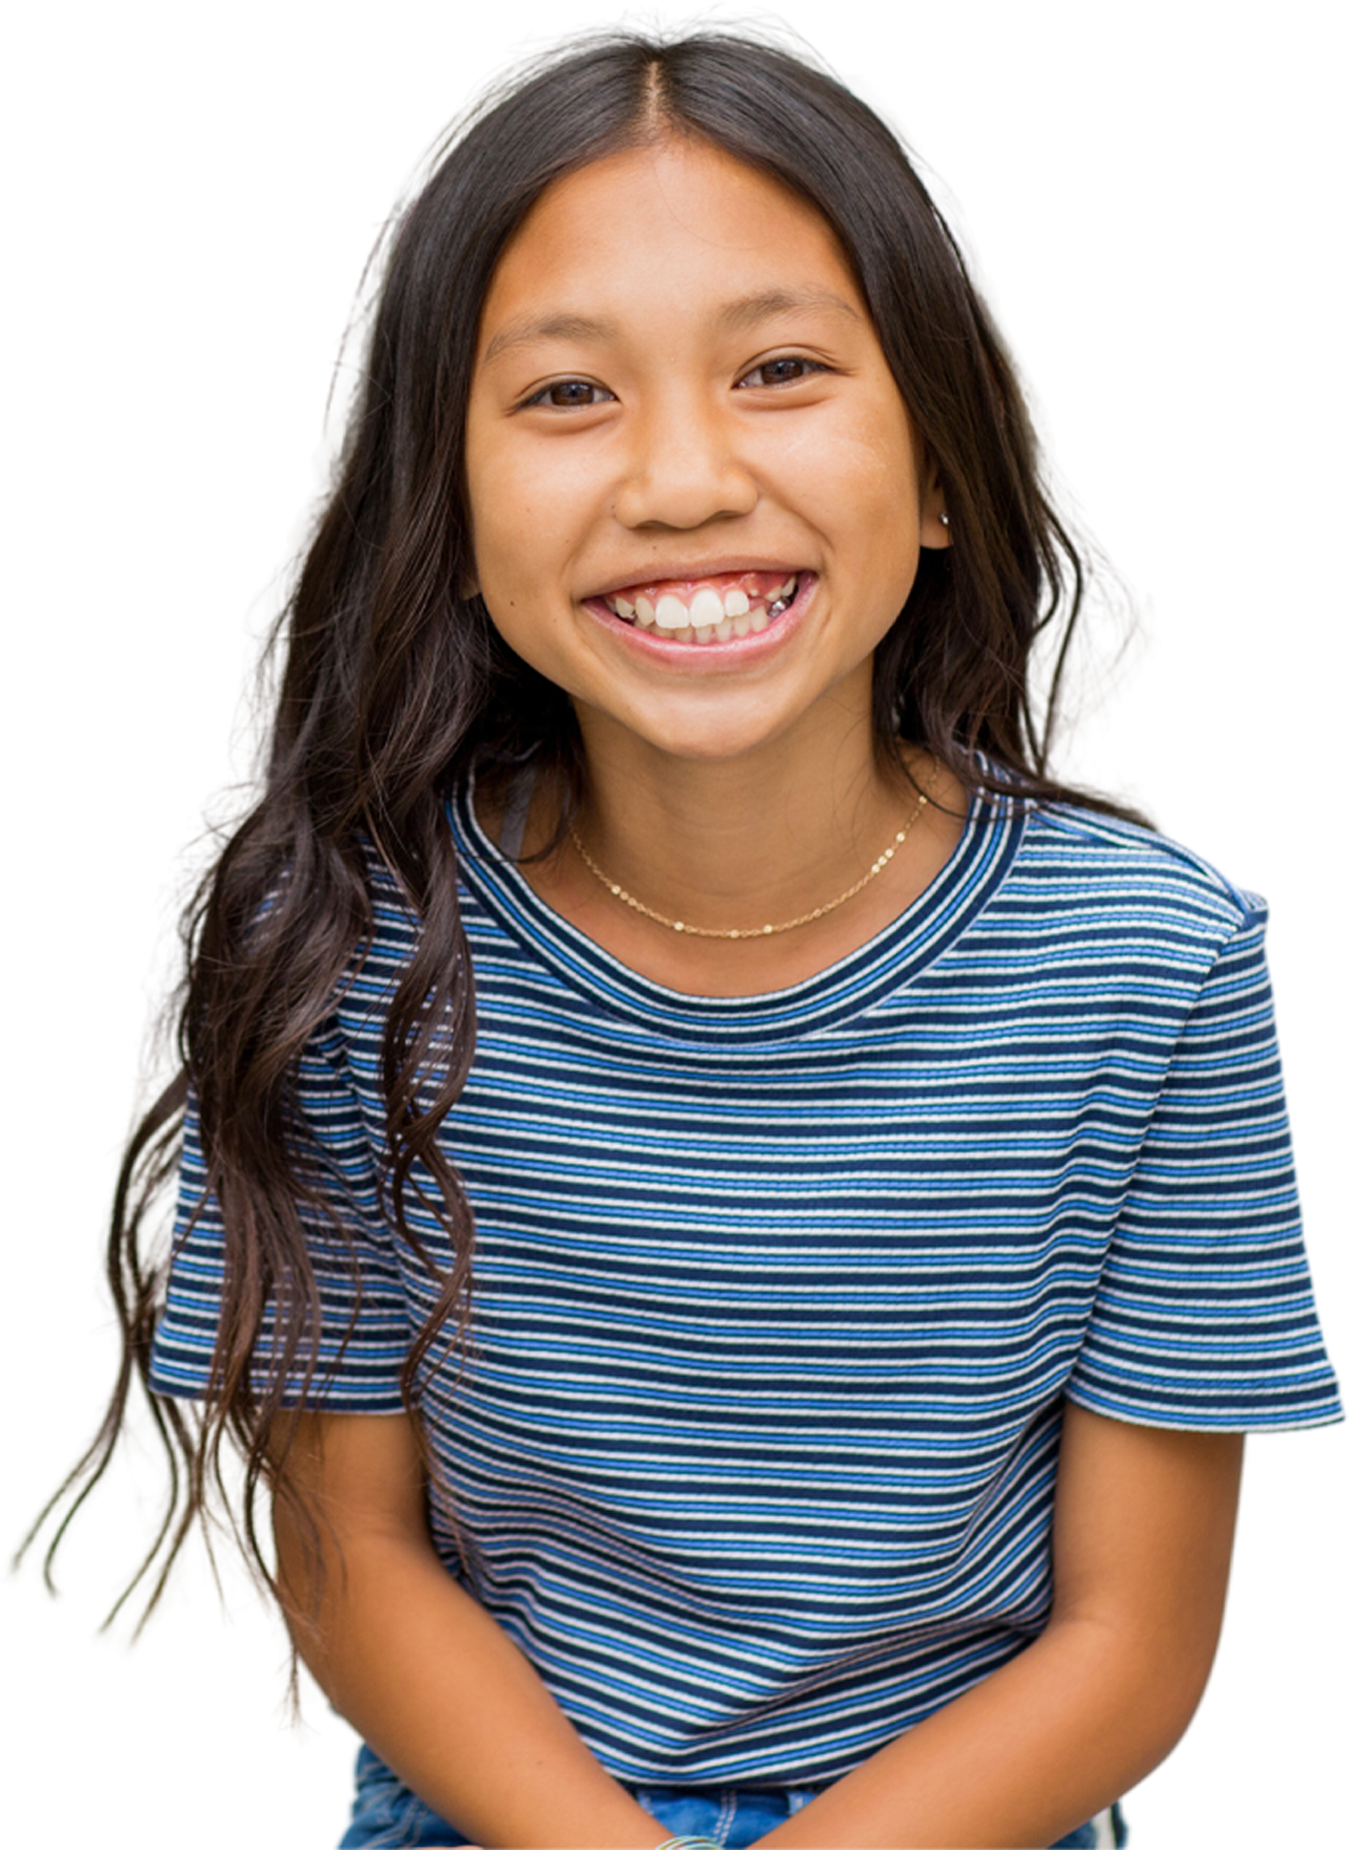 A cutout of a young girl wearing striped shirt, and showing her smile to the camera